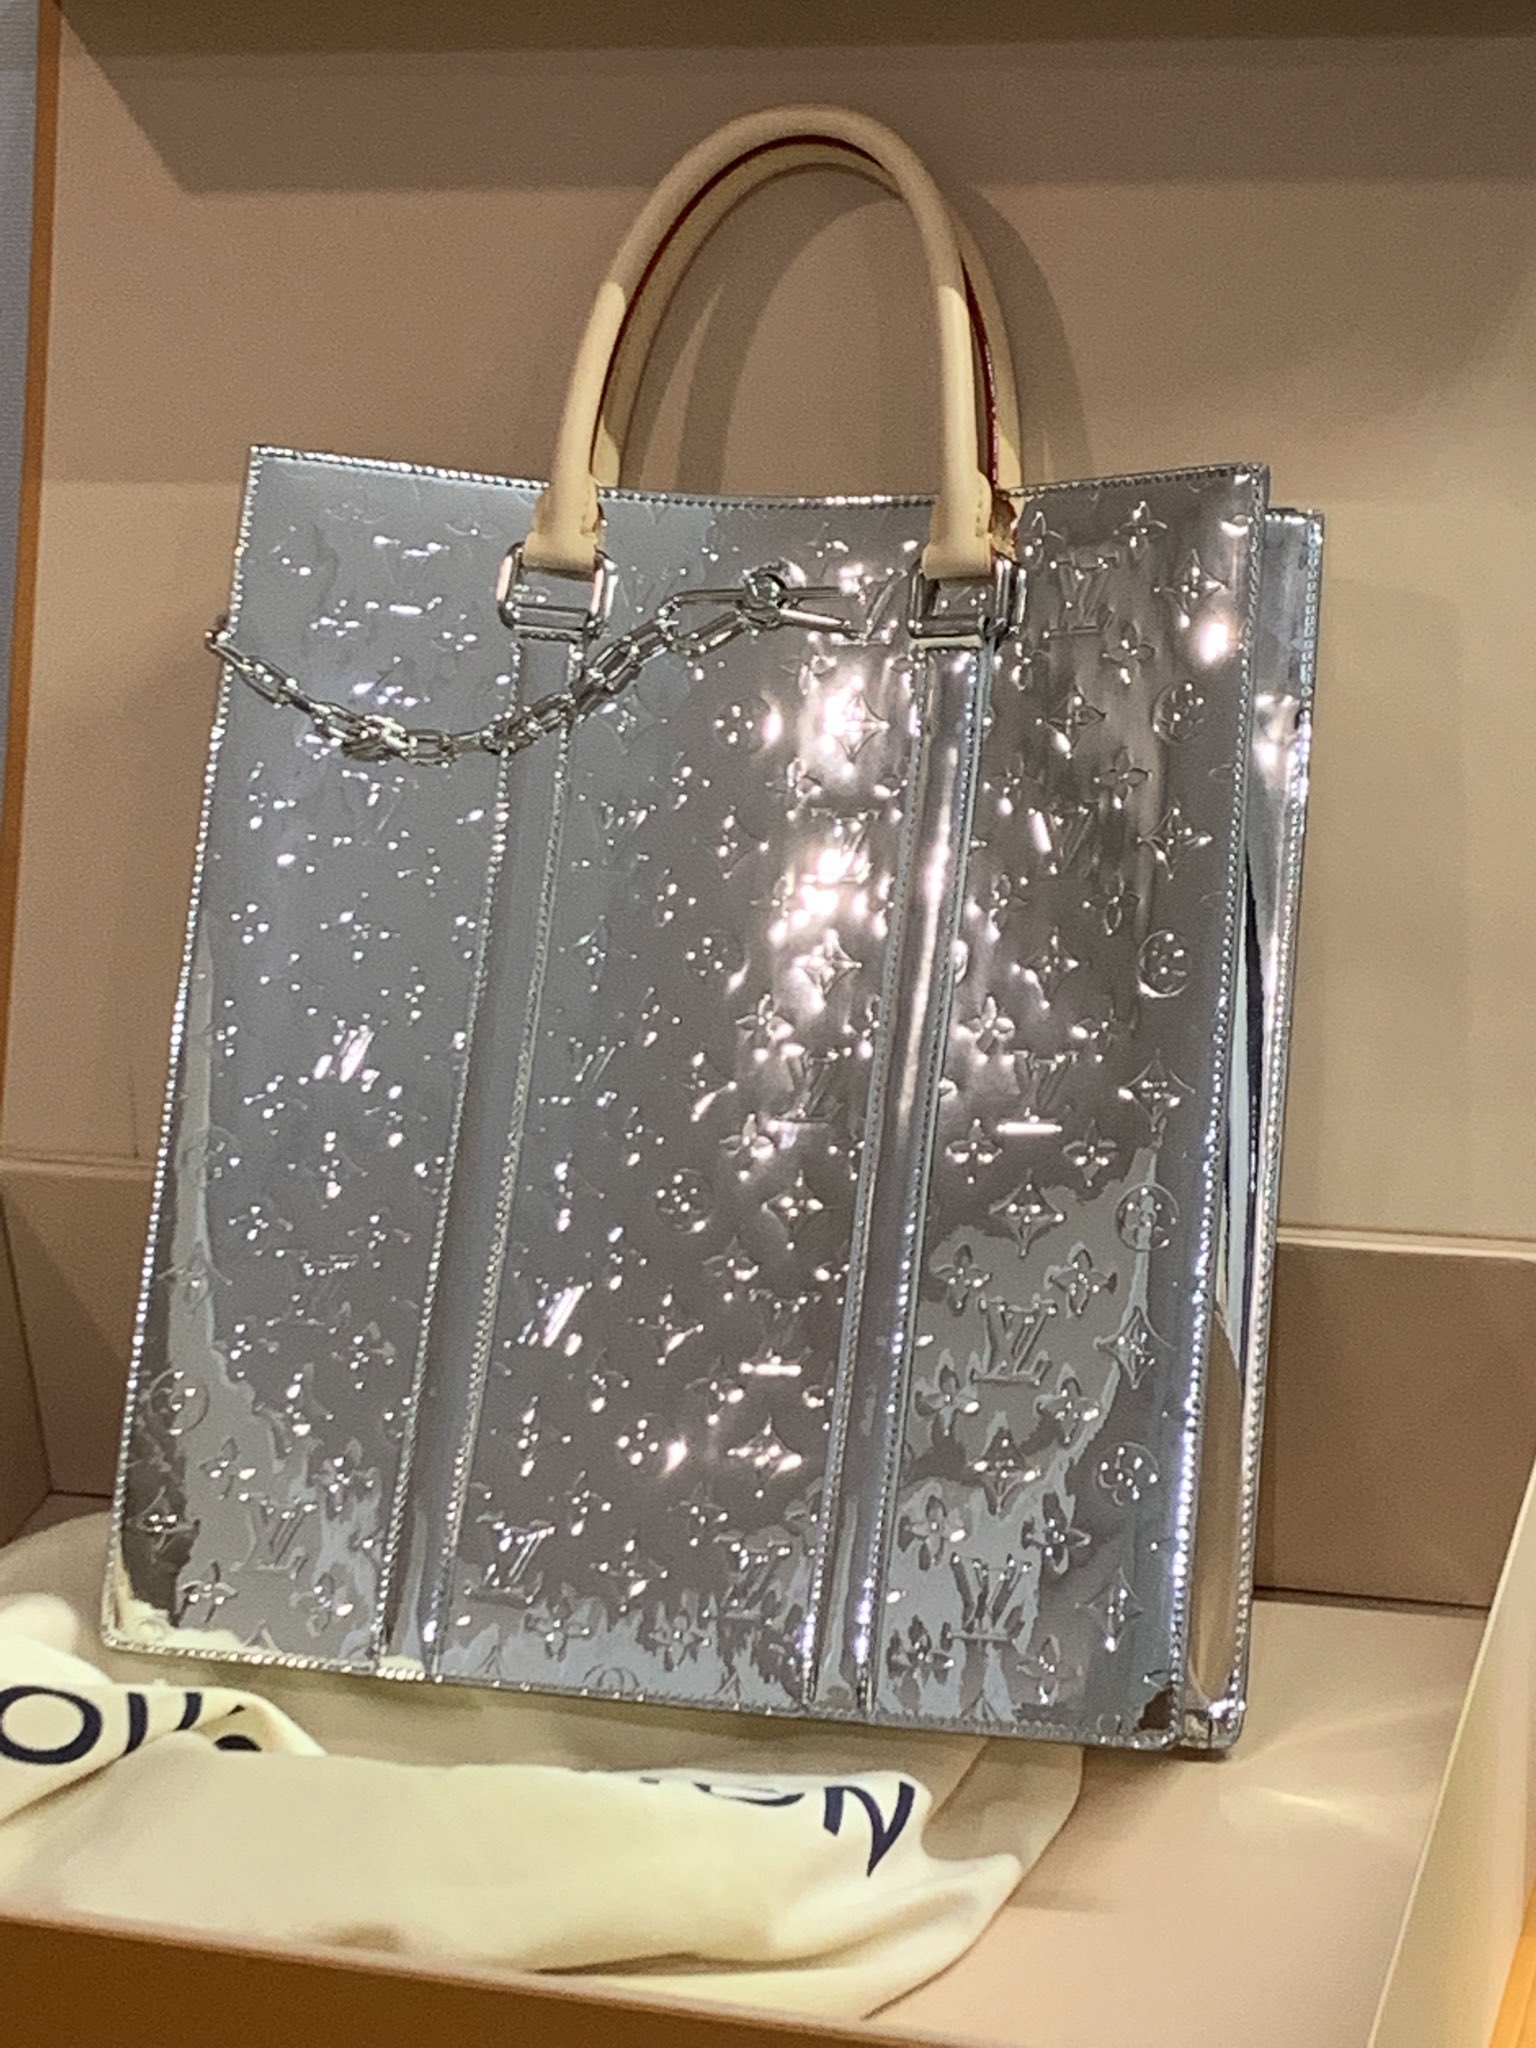 Louis Vuitton on X: #LouisVuitton Ambassador and @bts_bighit member #Jimin  shows off a silver tote bag from the collection at @ViriglAbloh's  #LVMenFW21 fashion show in Seoul. Watch now on Twitter or   #